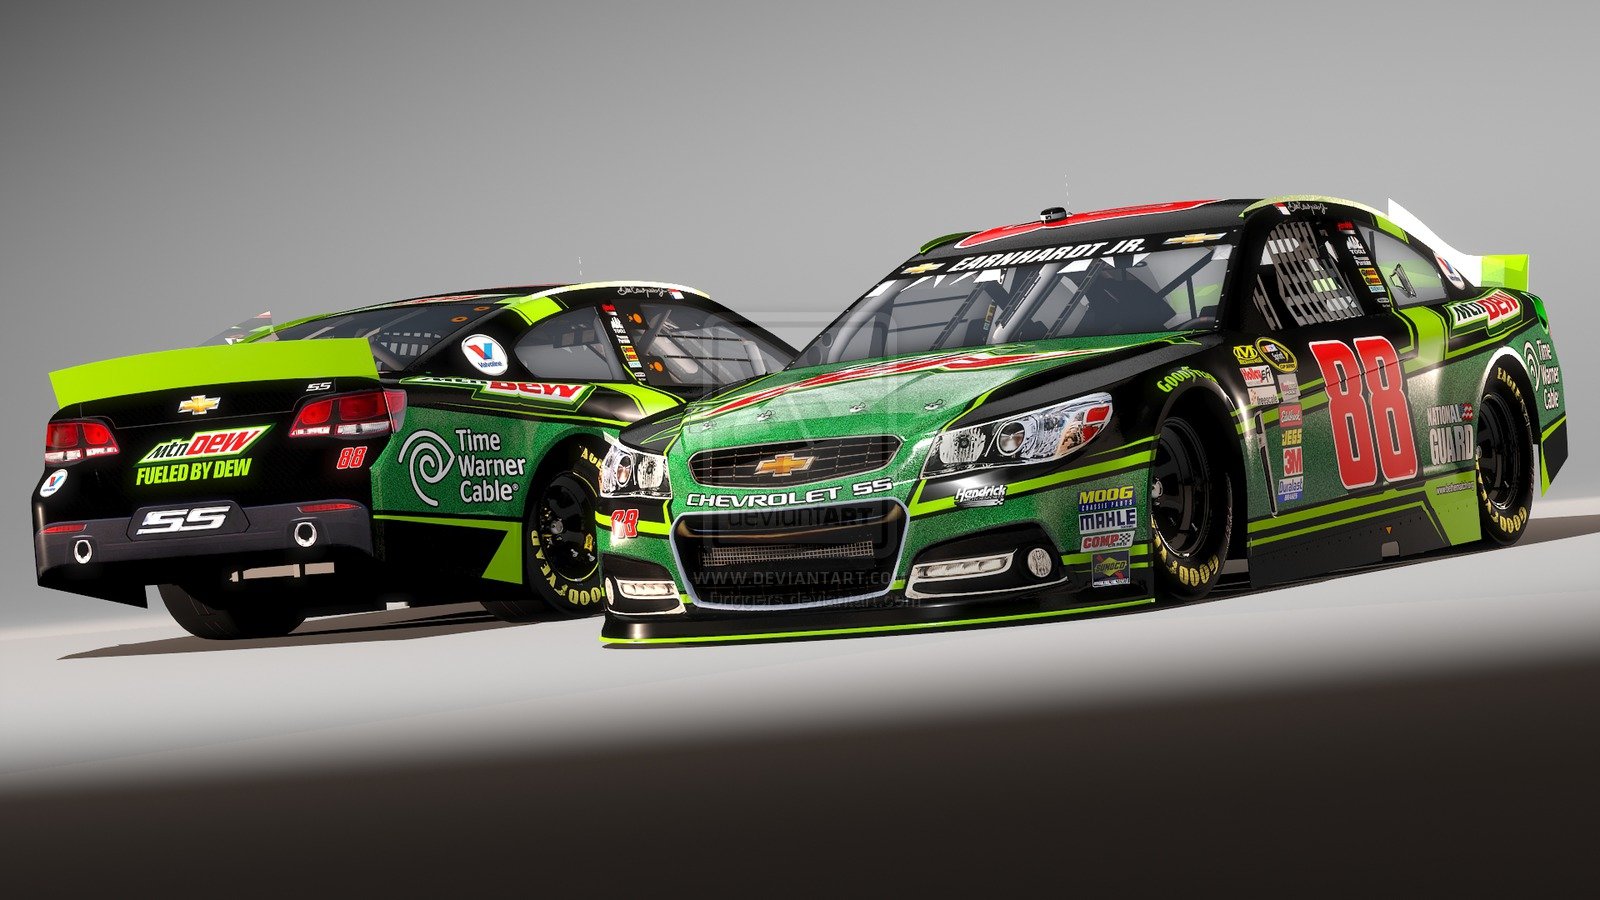 88 Dale Earnhardt Jr Mtn Dew Chevy SS by Driggers